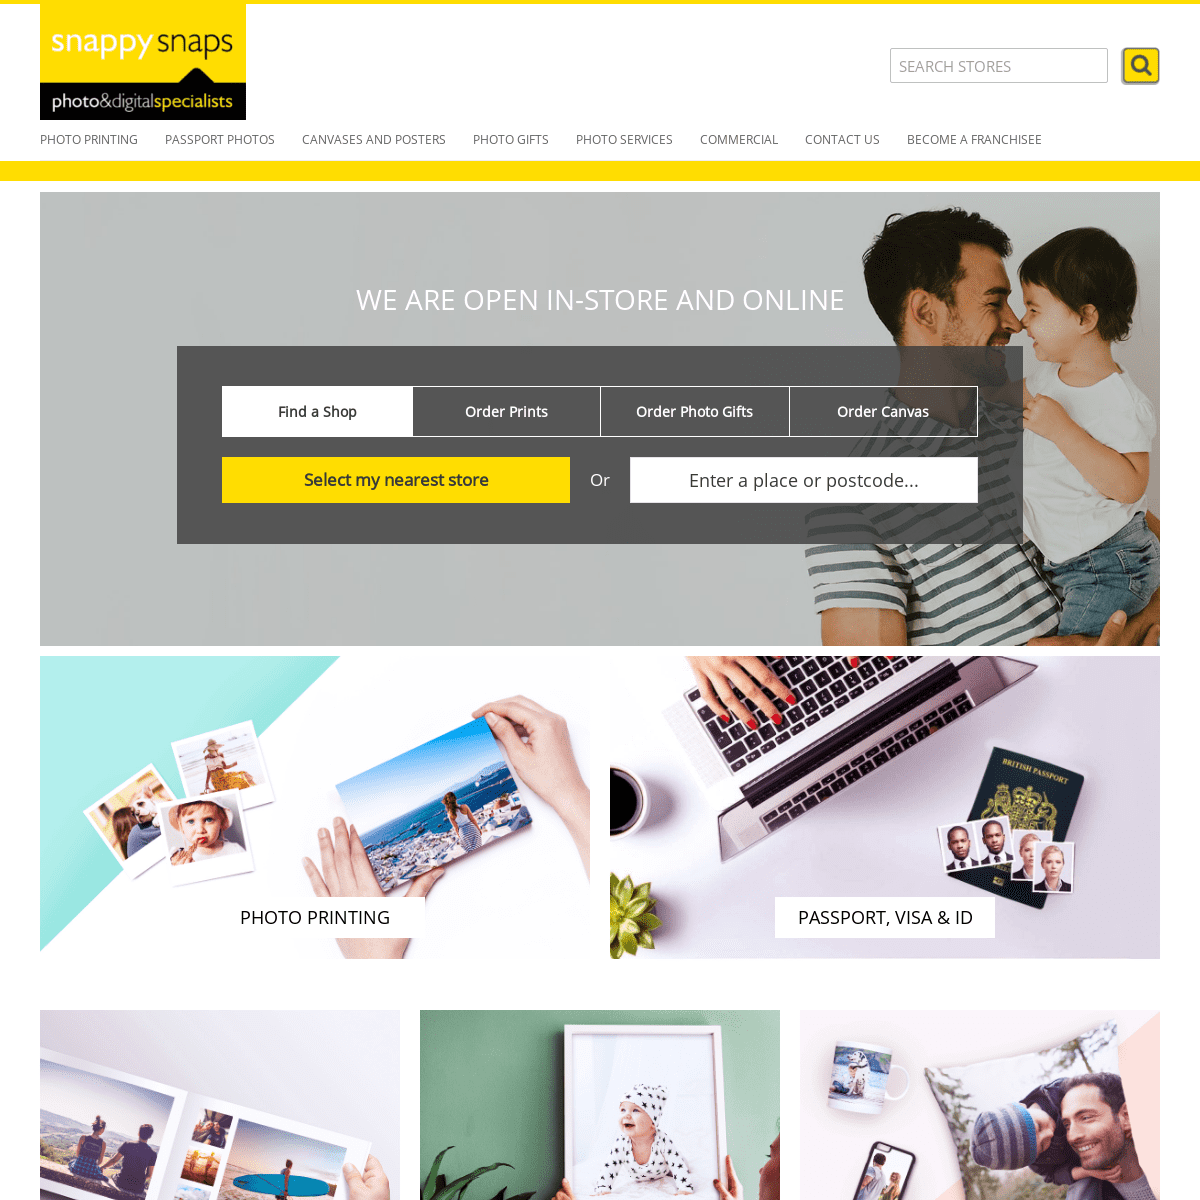 A complete backup of https://snappysnaps.co.uk